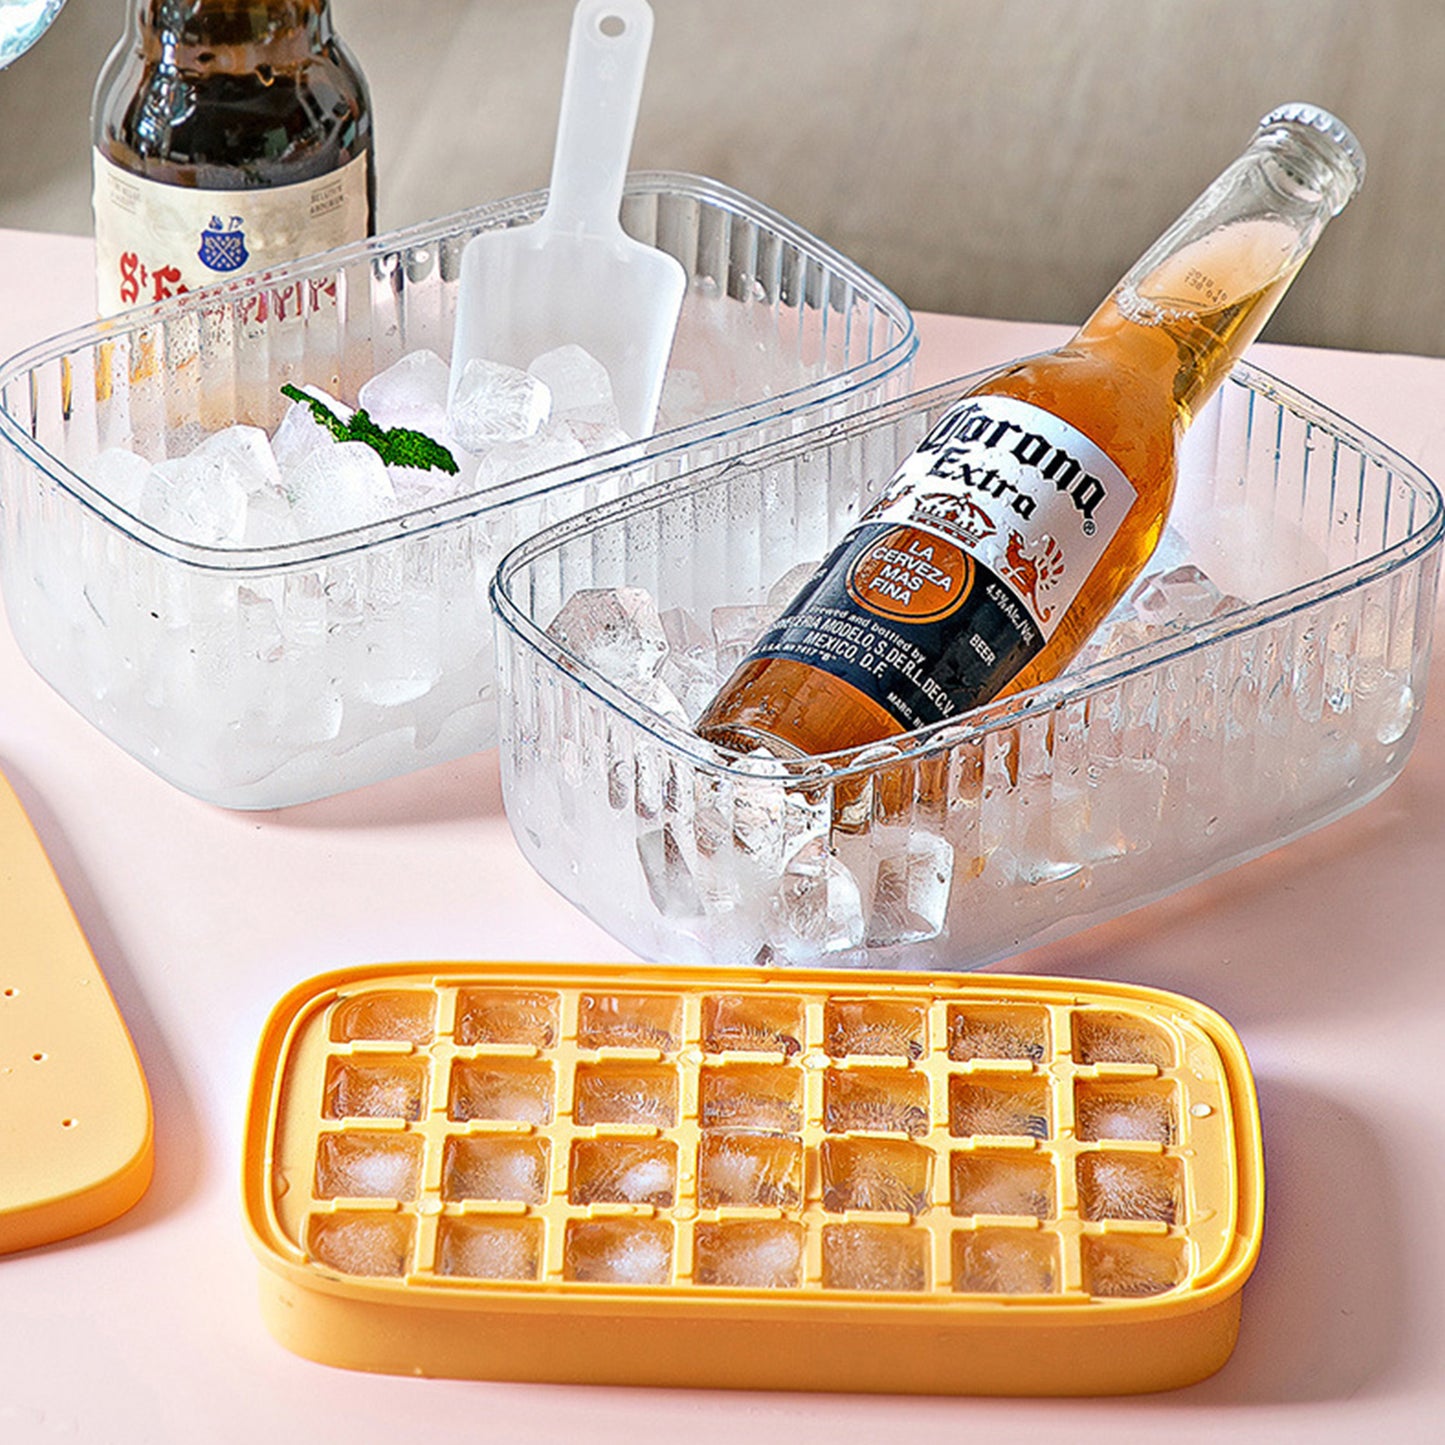 Press Type Ice Cube Tray With Lid, Silicone Ice Maker, Suitable